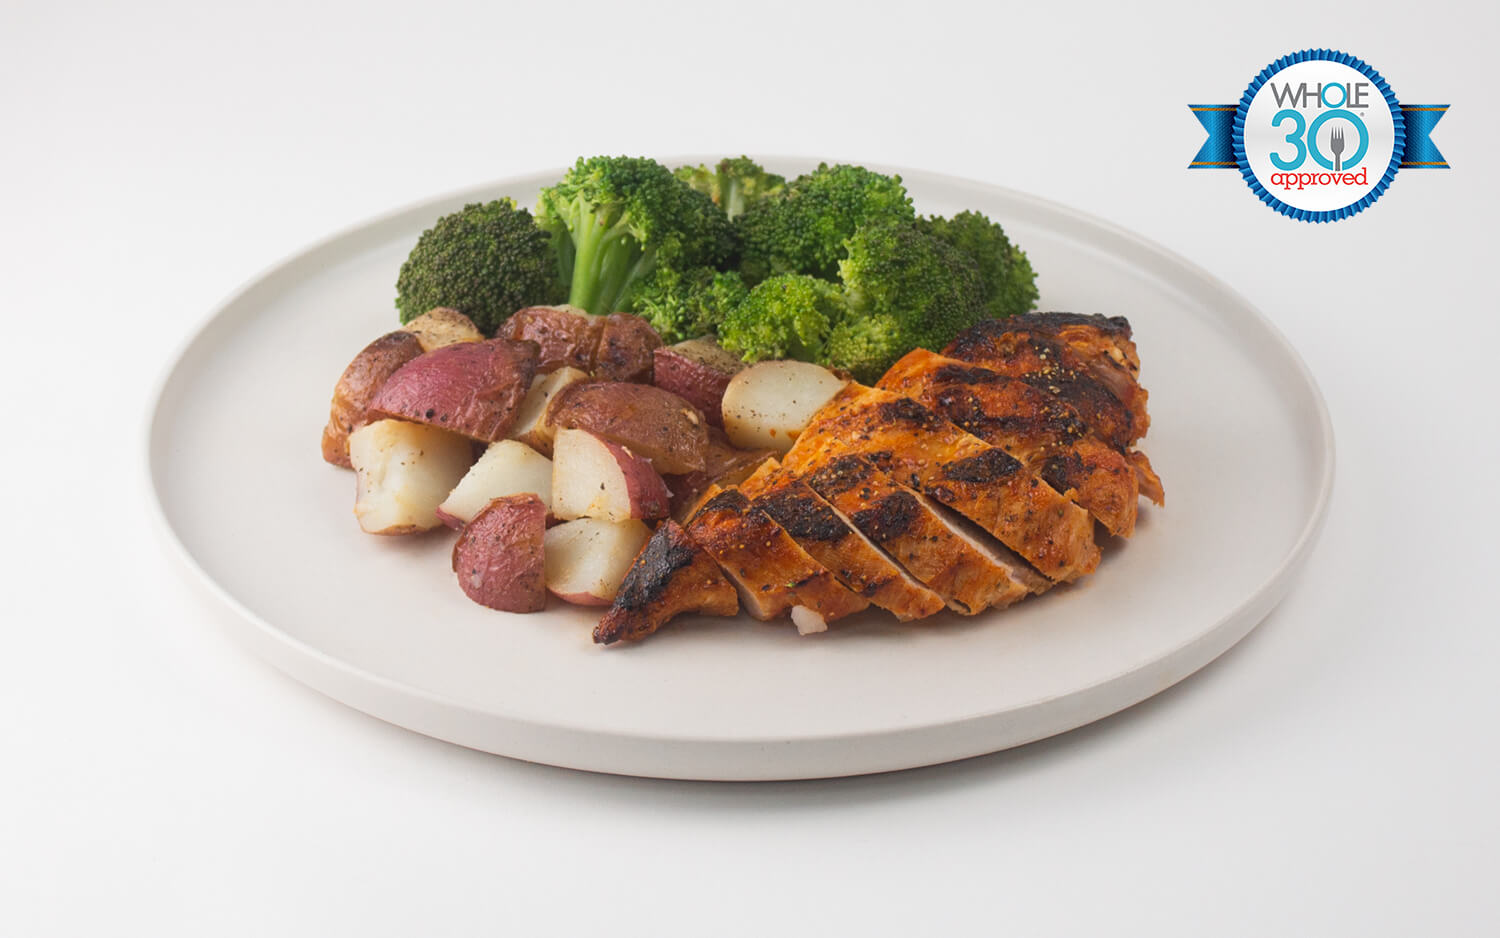 A Zesty hot lemon pepper chicken paired with red skinned potatoes and broccoli 